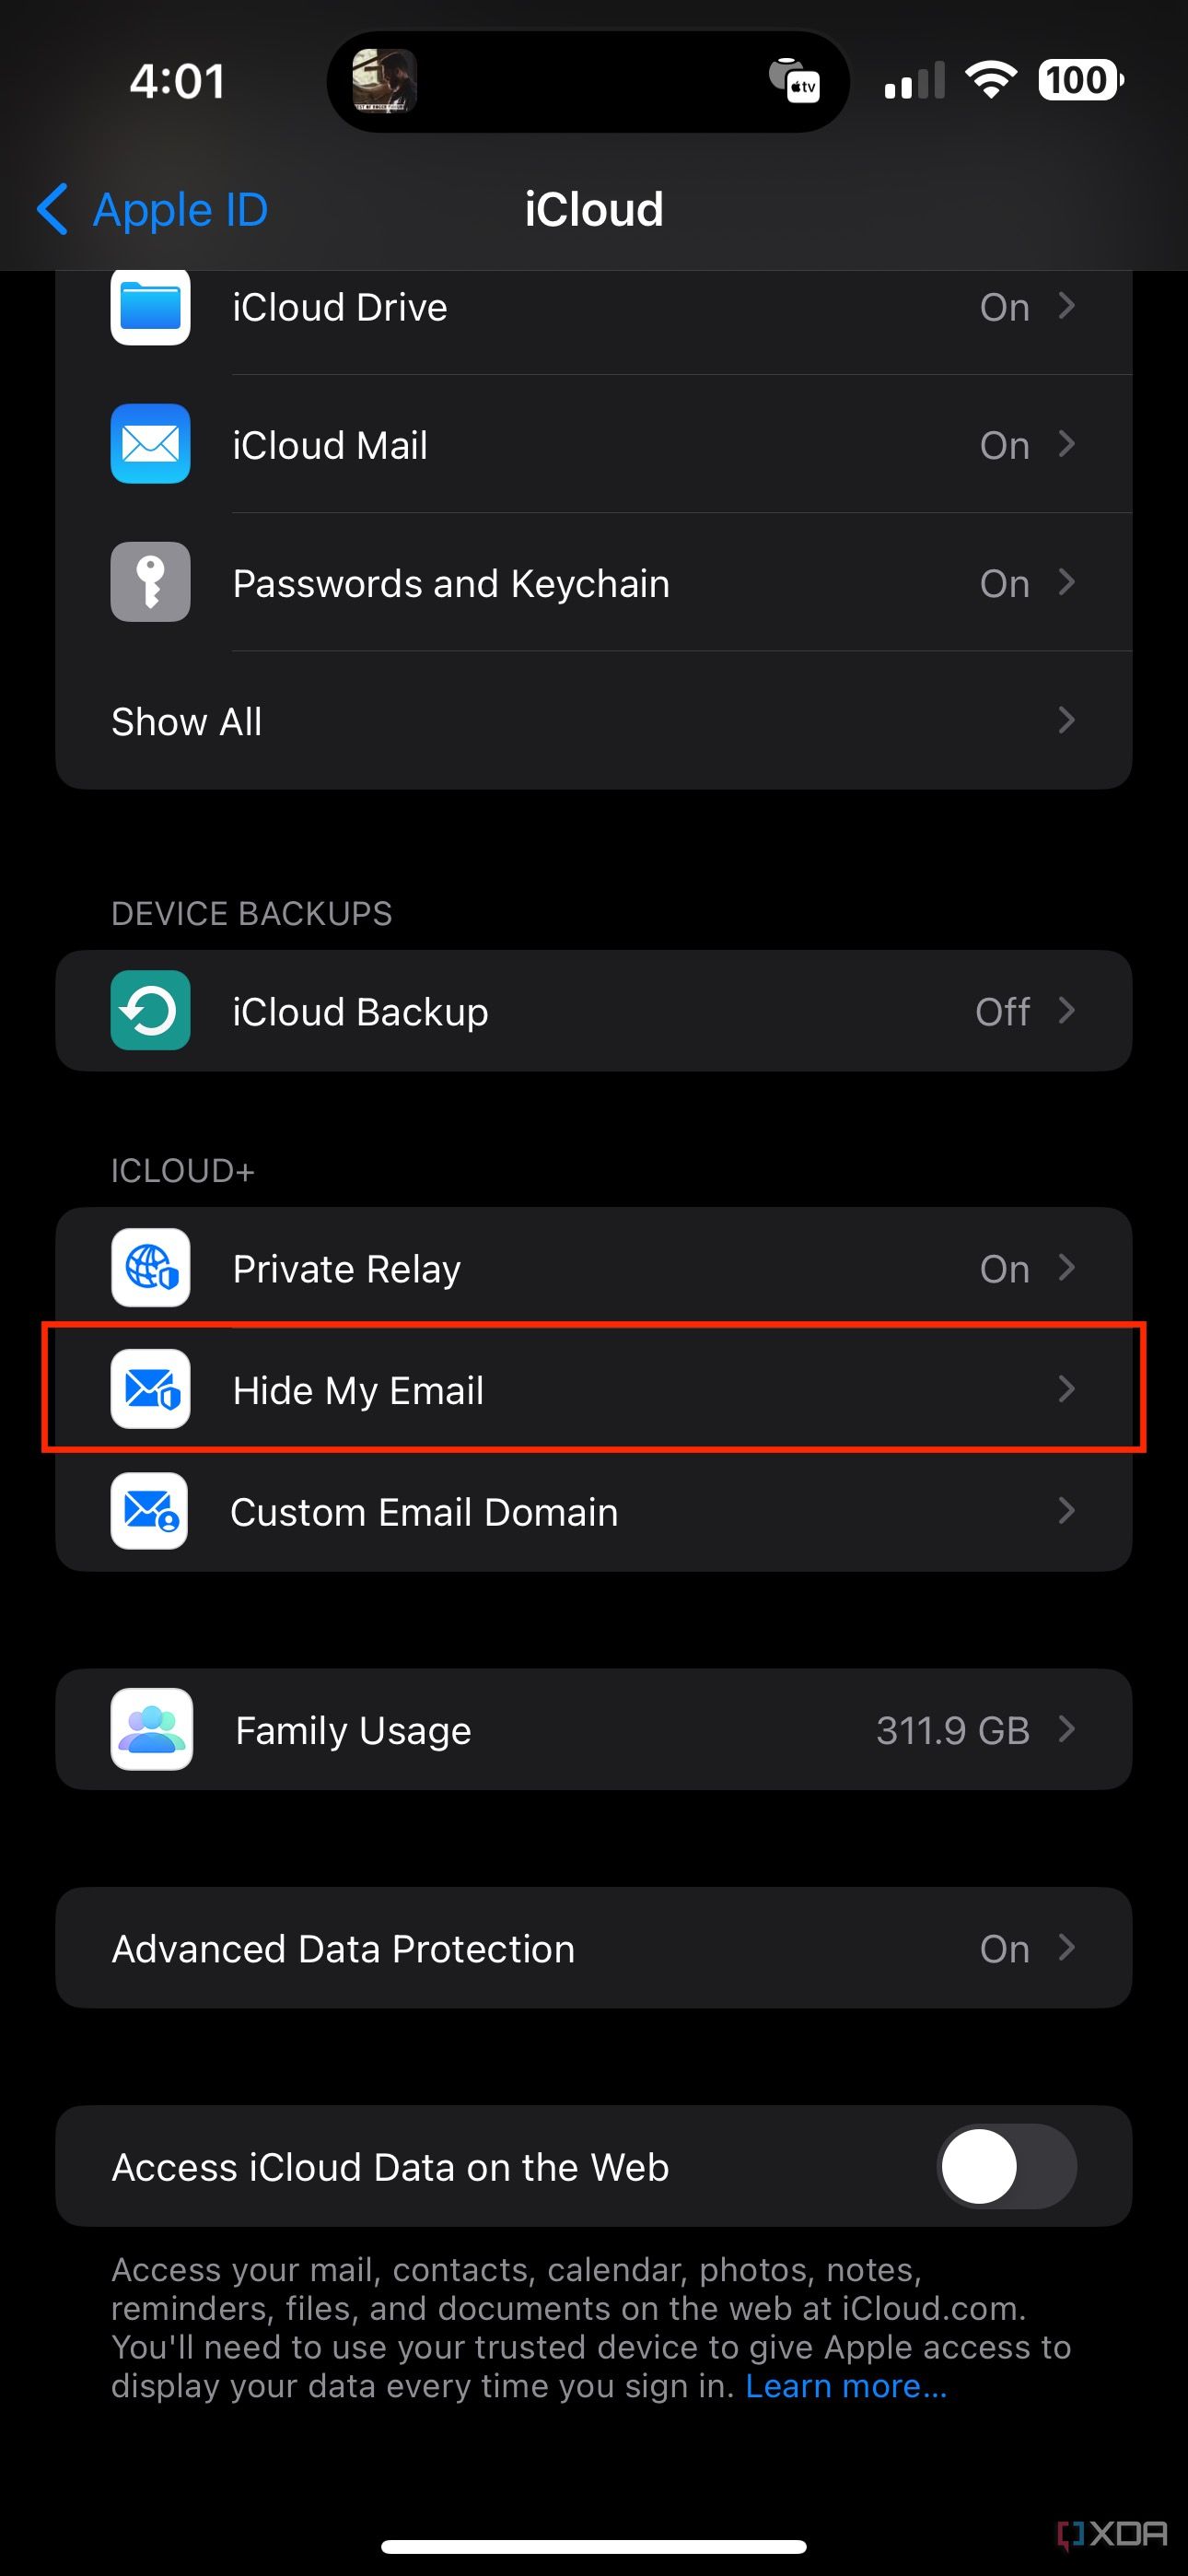 hide my email section in iOS settings